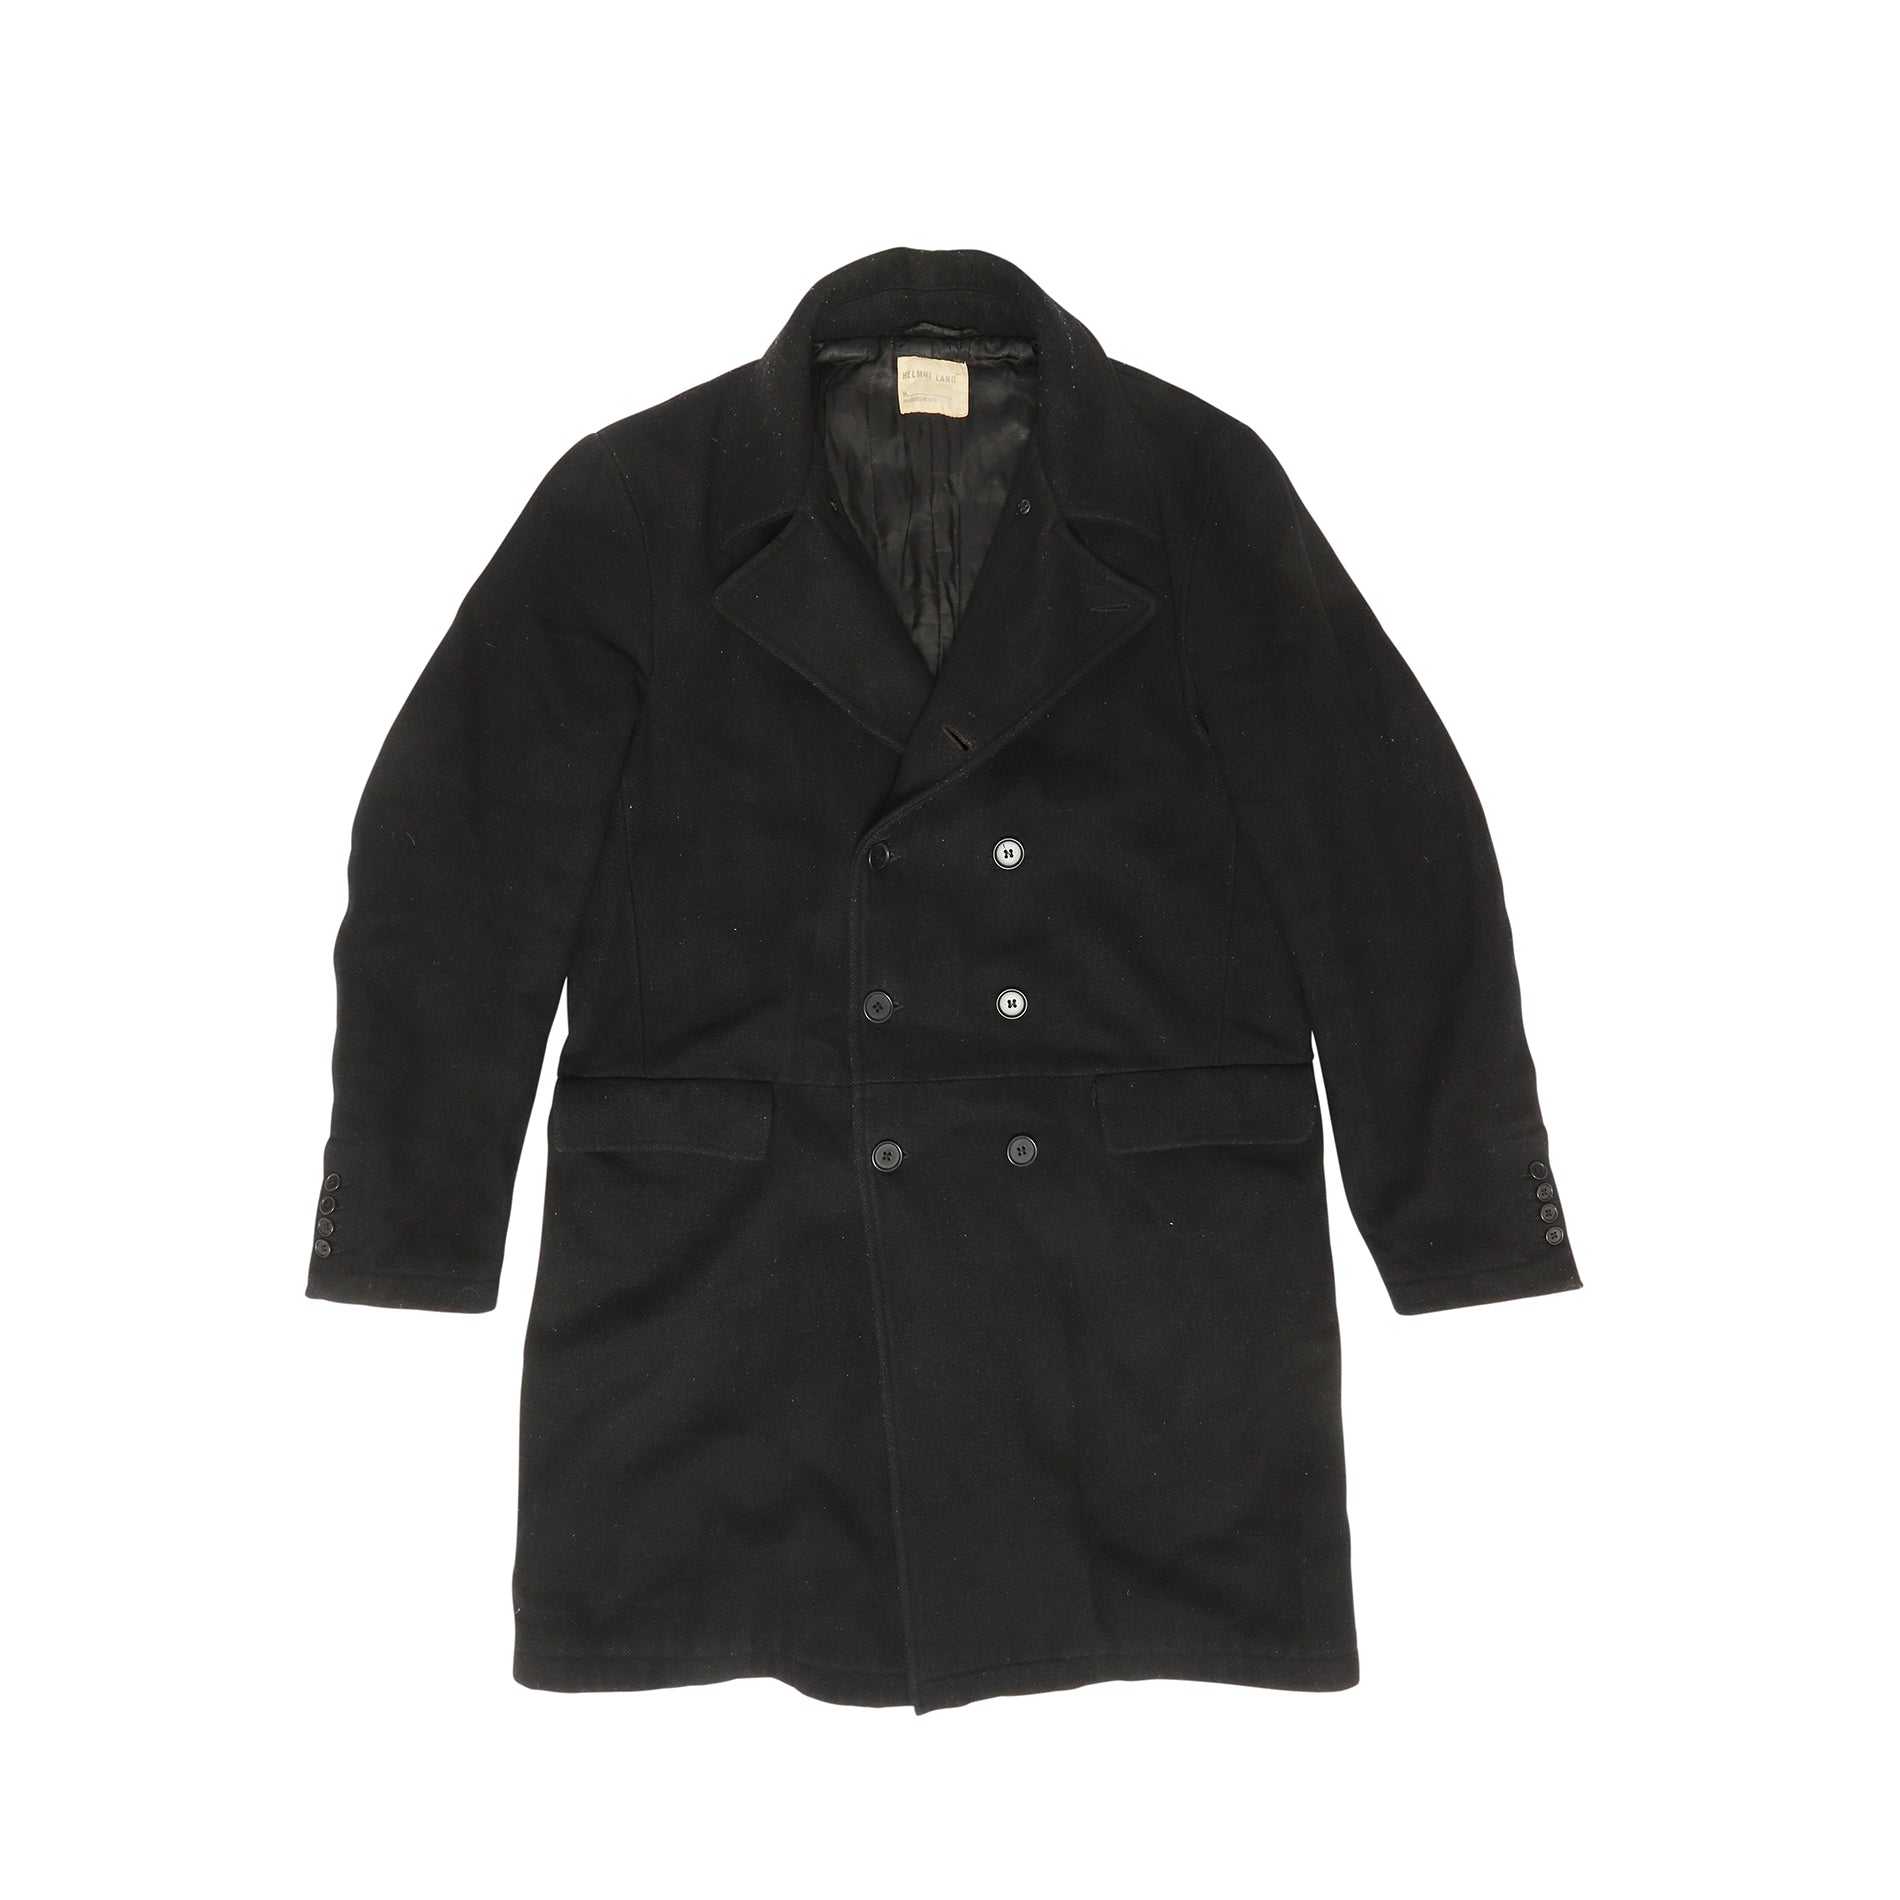 Helmut Lang AW98 Double Breasted Wool Coat